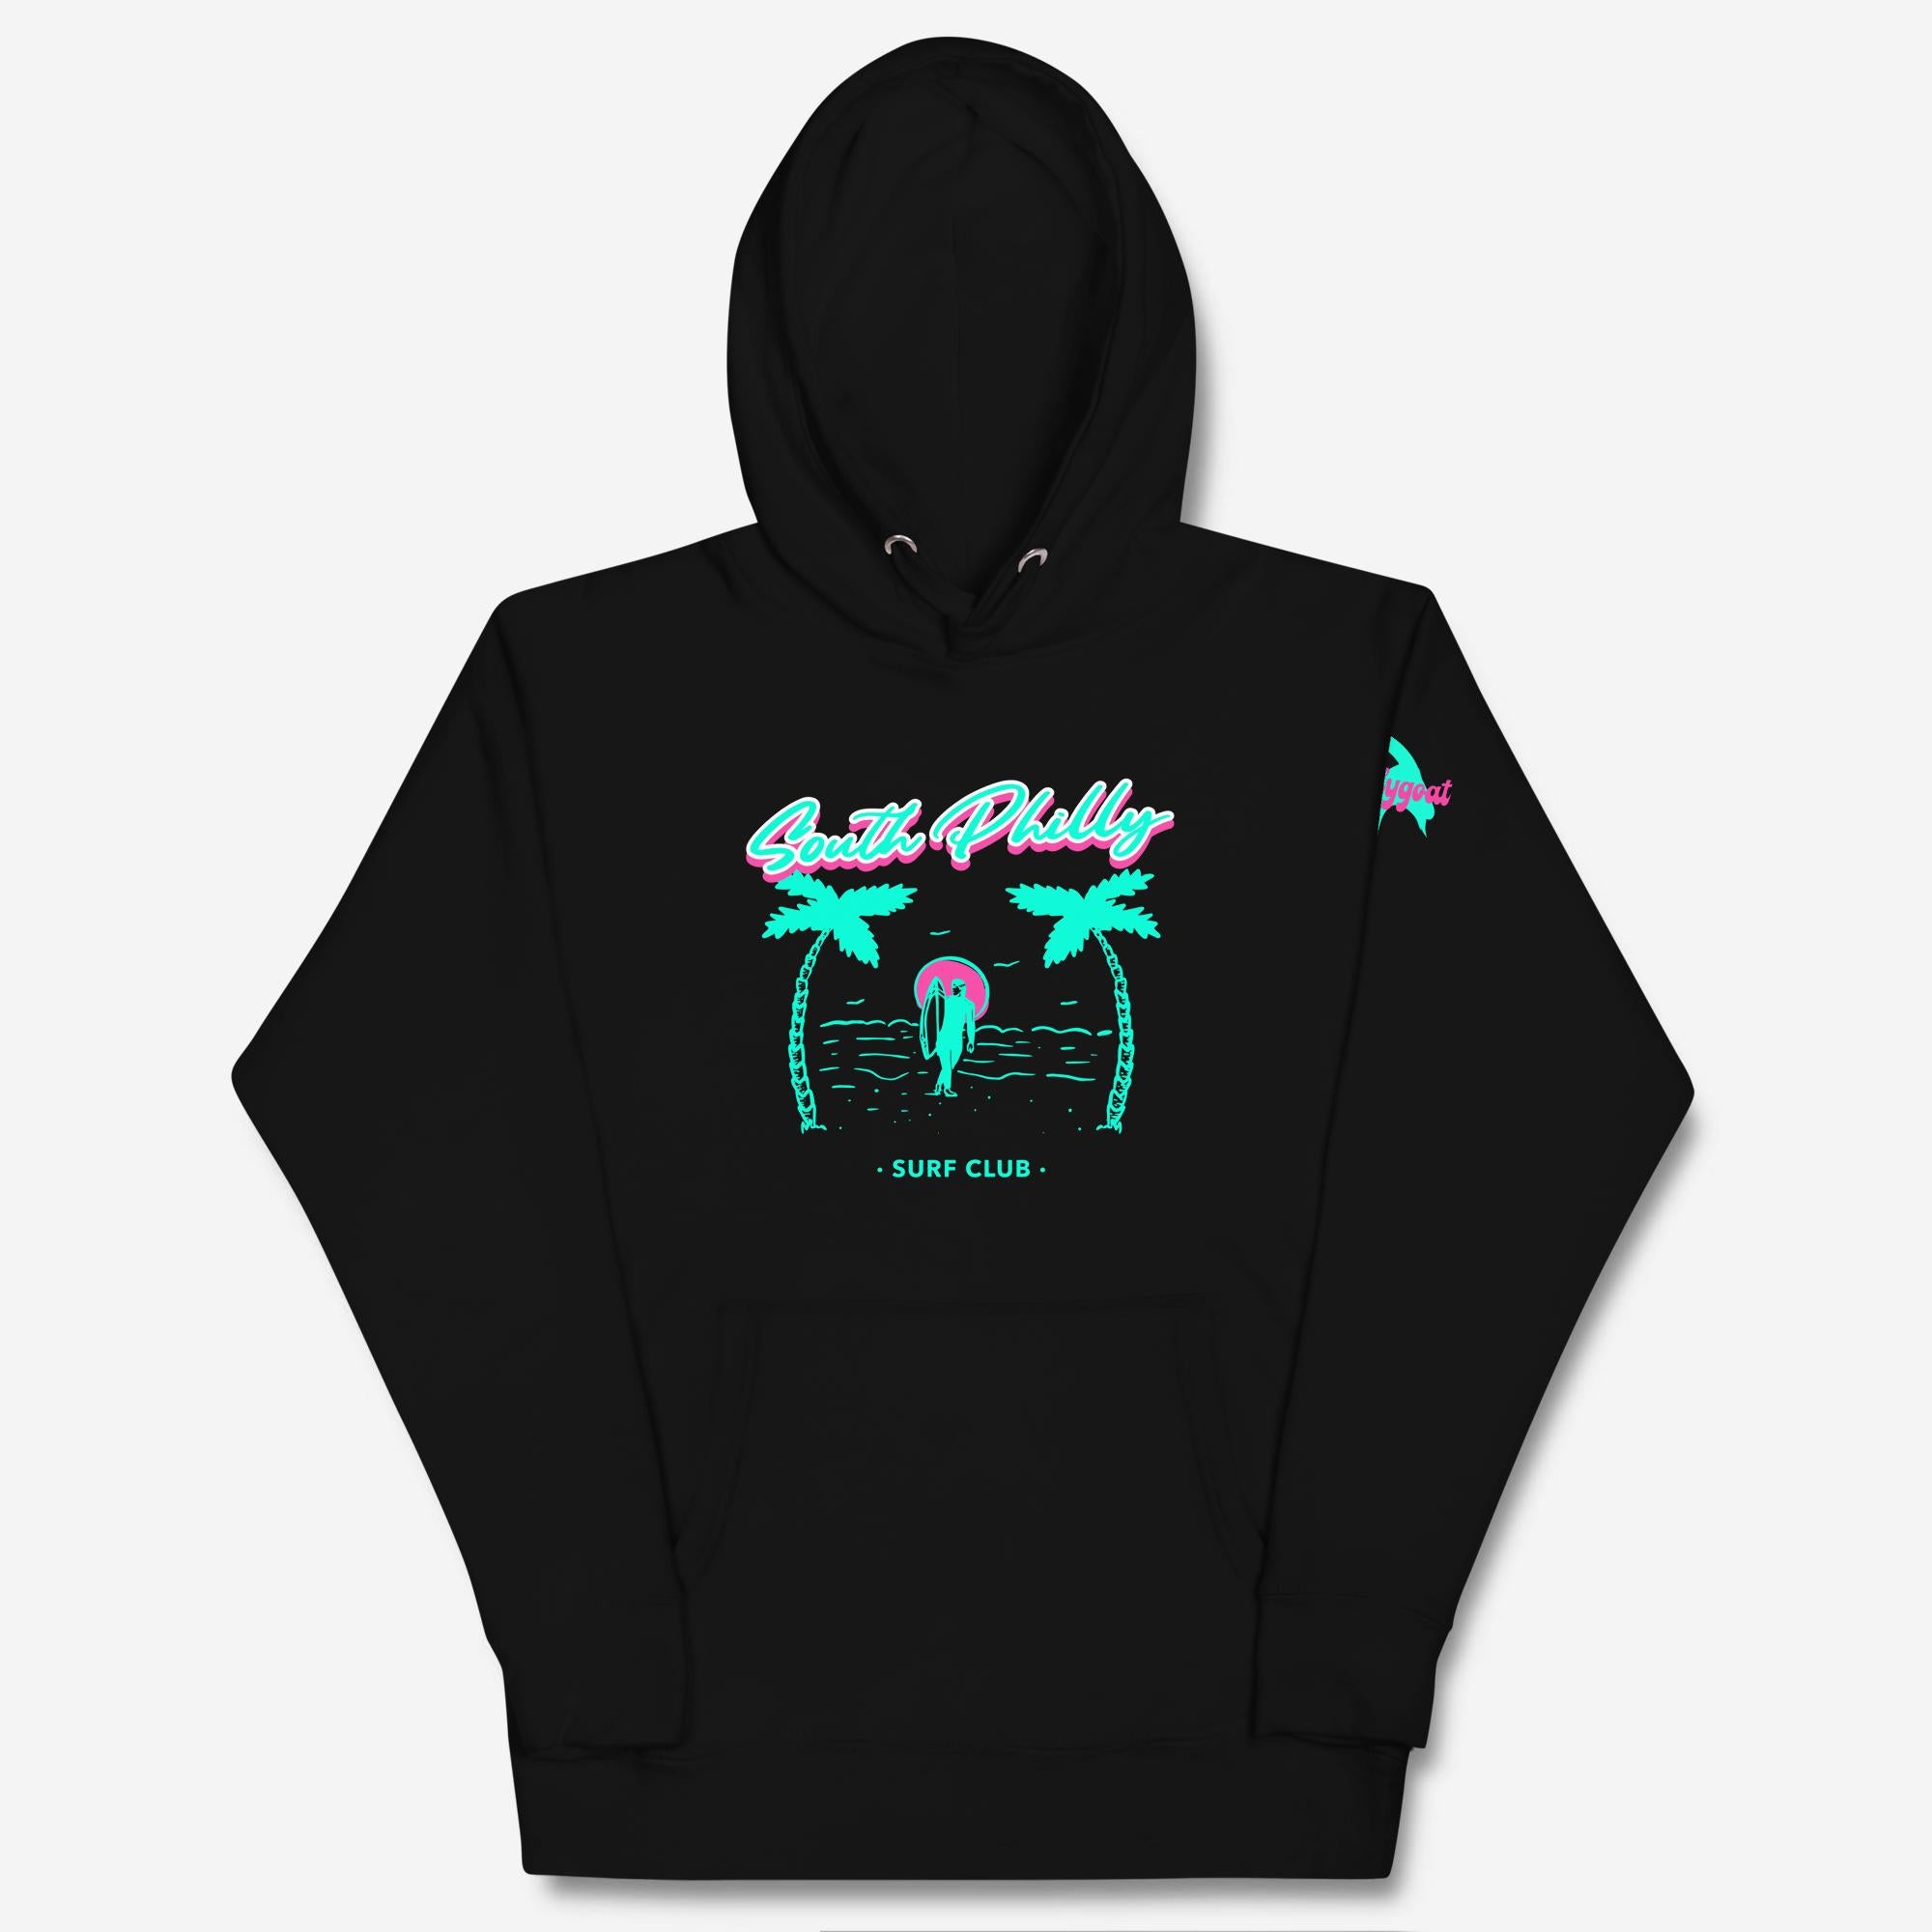 "South Philly Surf Club" Hoodie